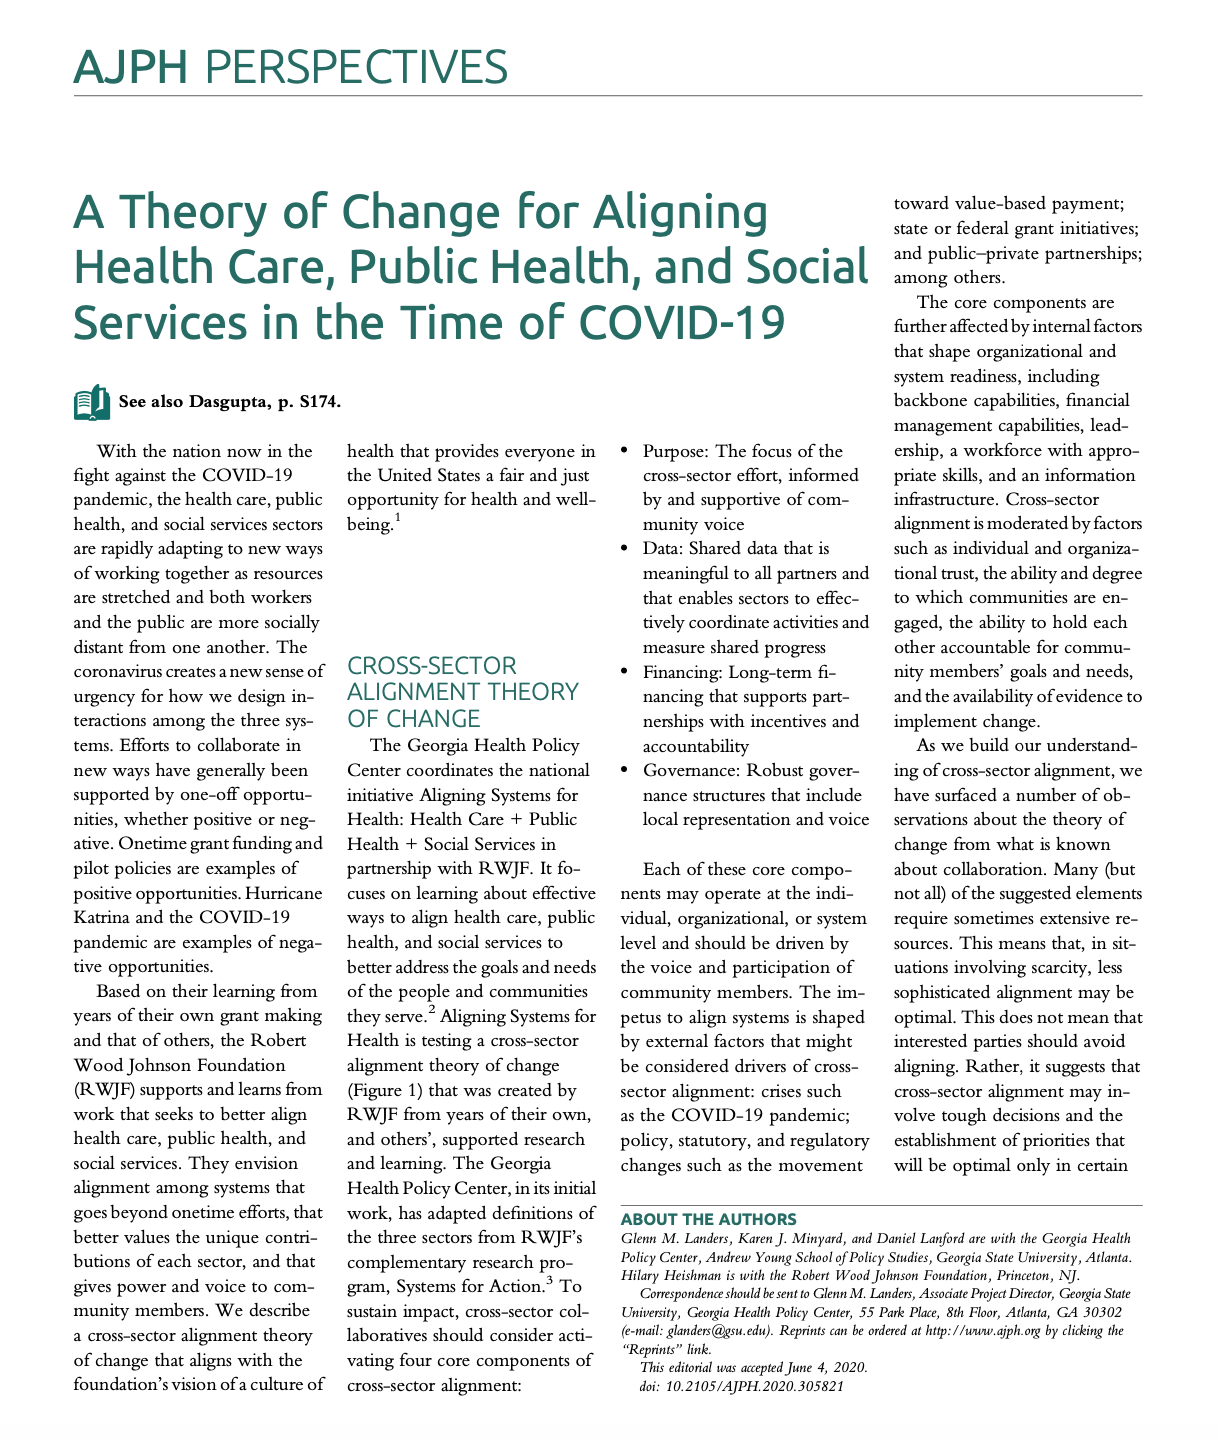 A Theory of Change for Aligning Health Care, Public Health, and Social Services in the Time of COVID-19